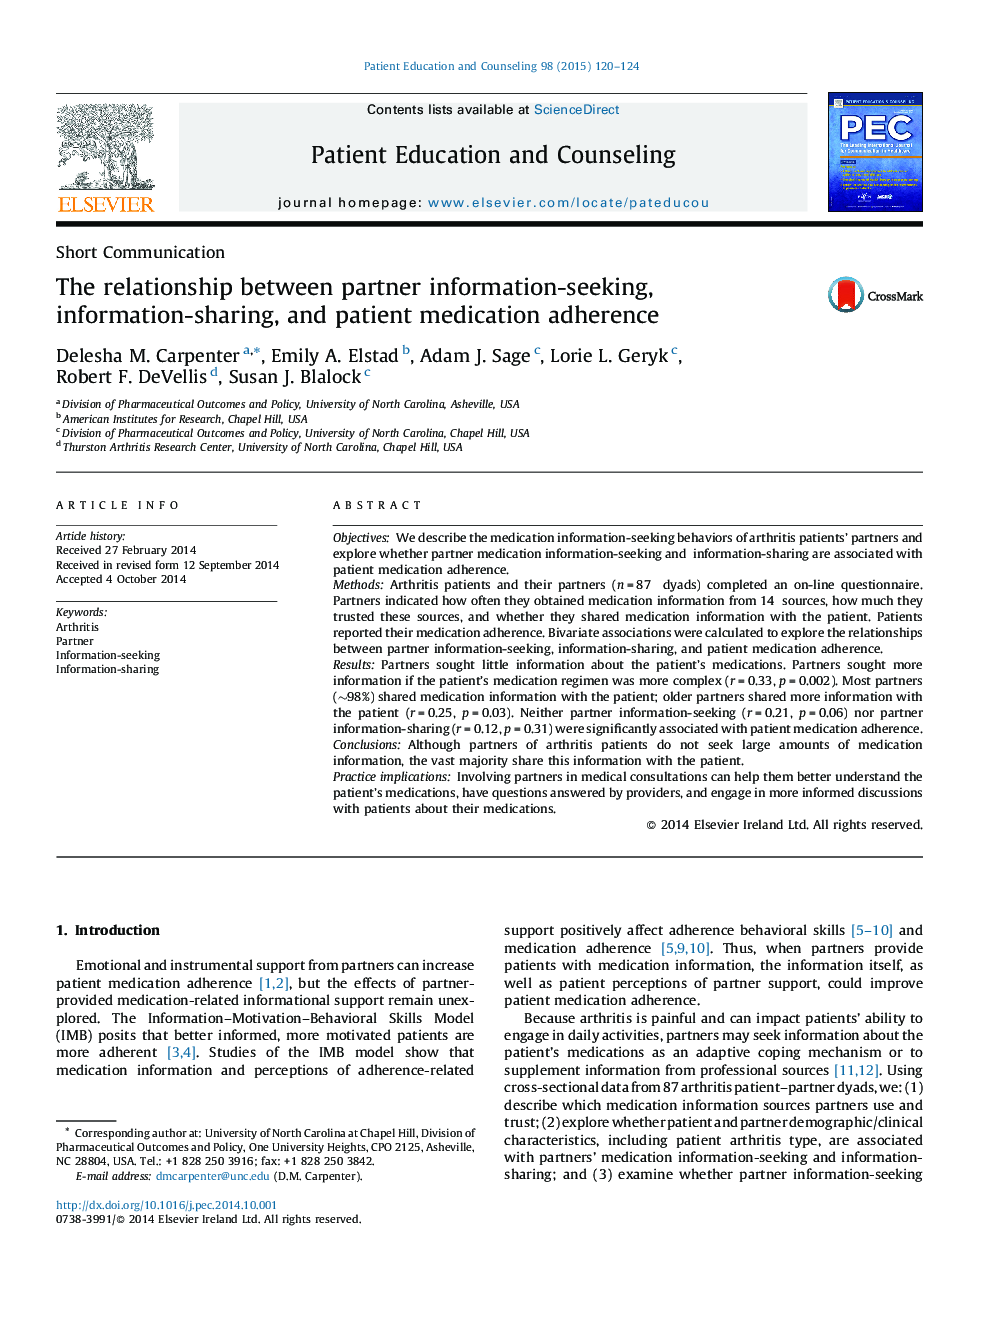 The relationship between partner information-seeking, information-sharing, and patient medication adherence